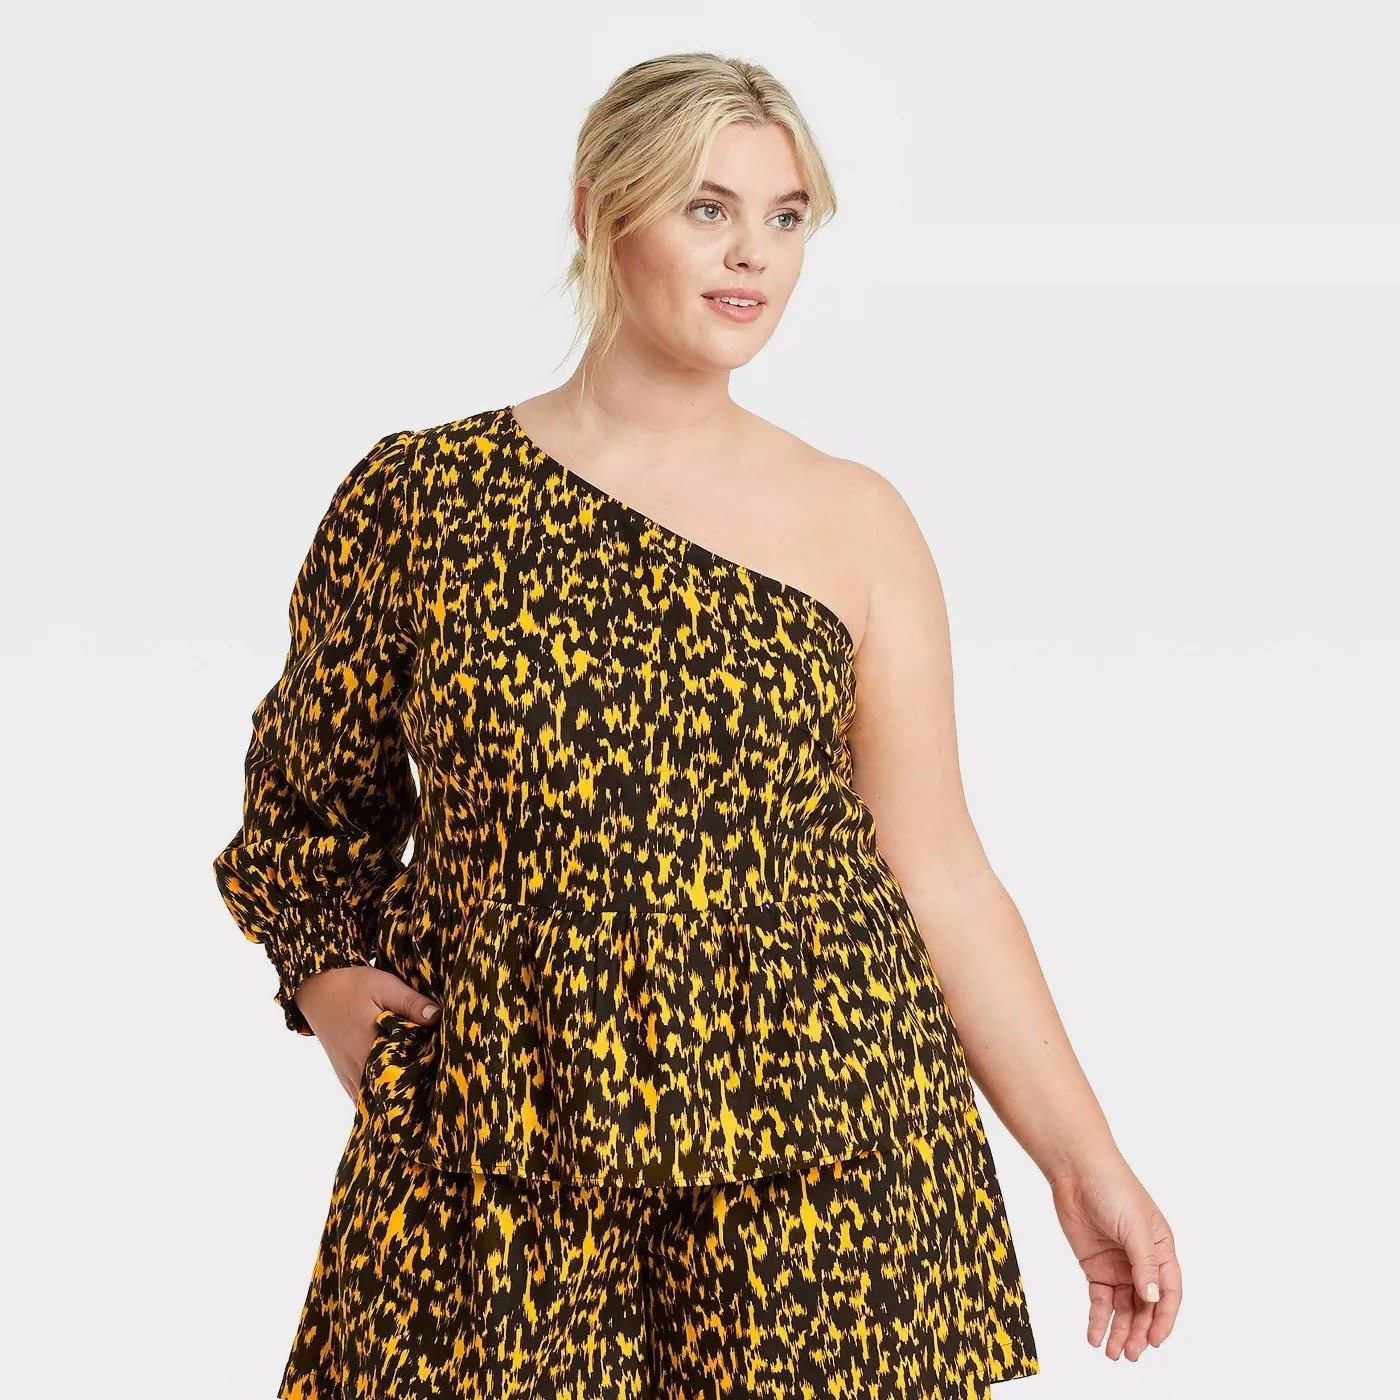 Model wearing black and yellow spotted top with cuffed sleeve